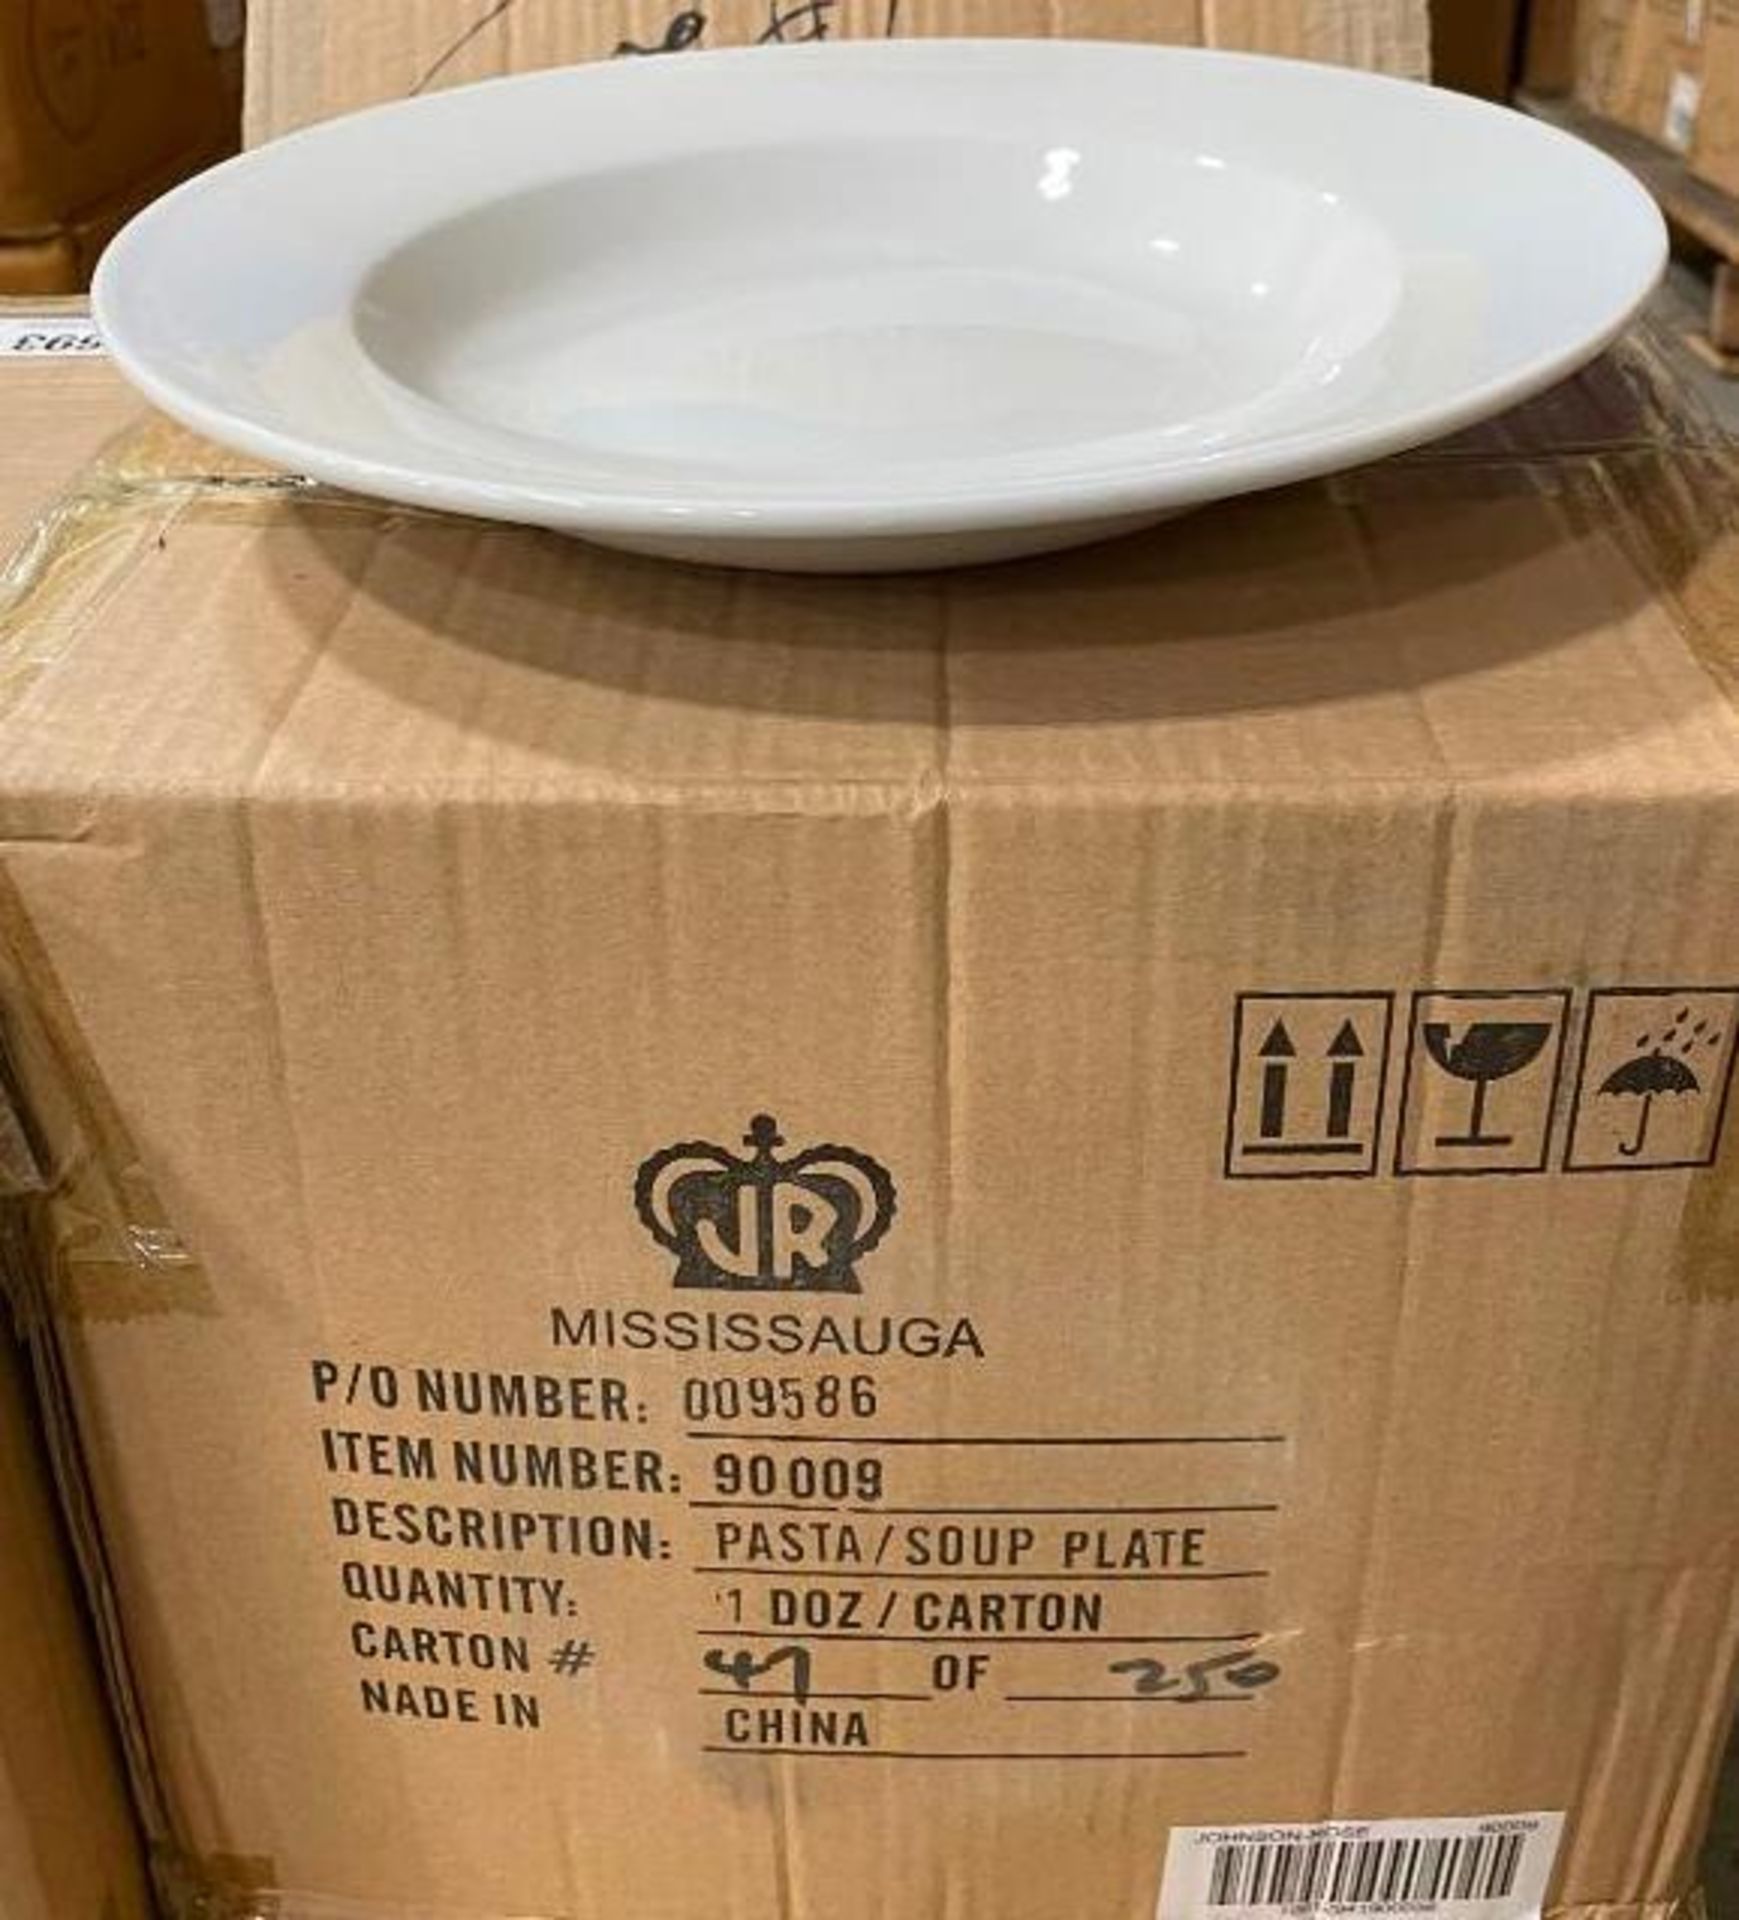 3 CASES OF 11 5/8" RIMMED PASTA / SOUP DISHES, JOHNSON ROSE 90009, CASE OF 12 - NEW